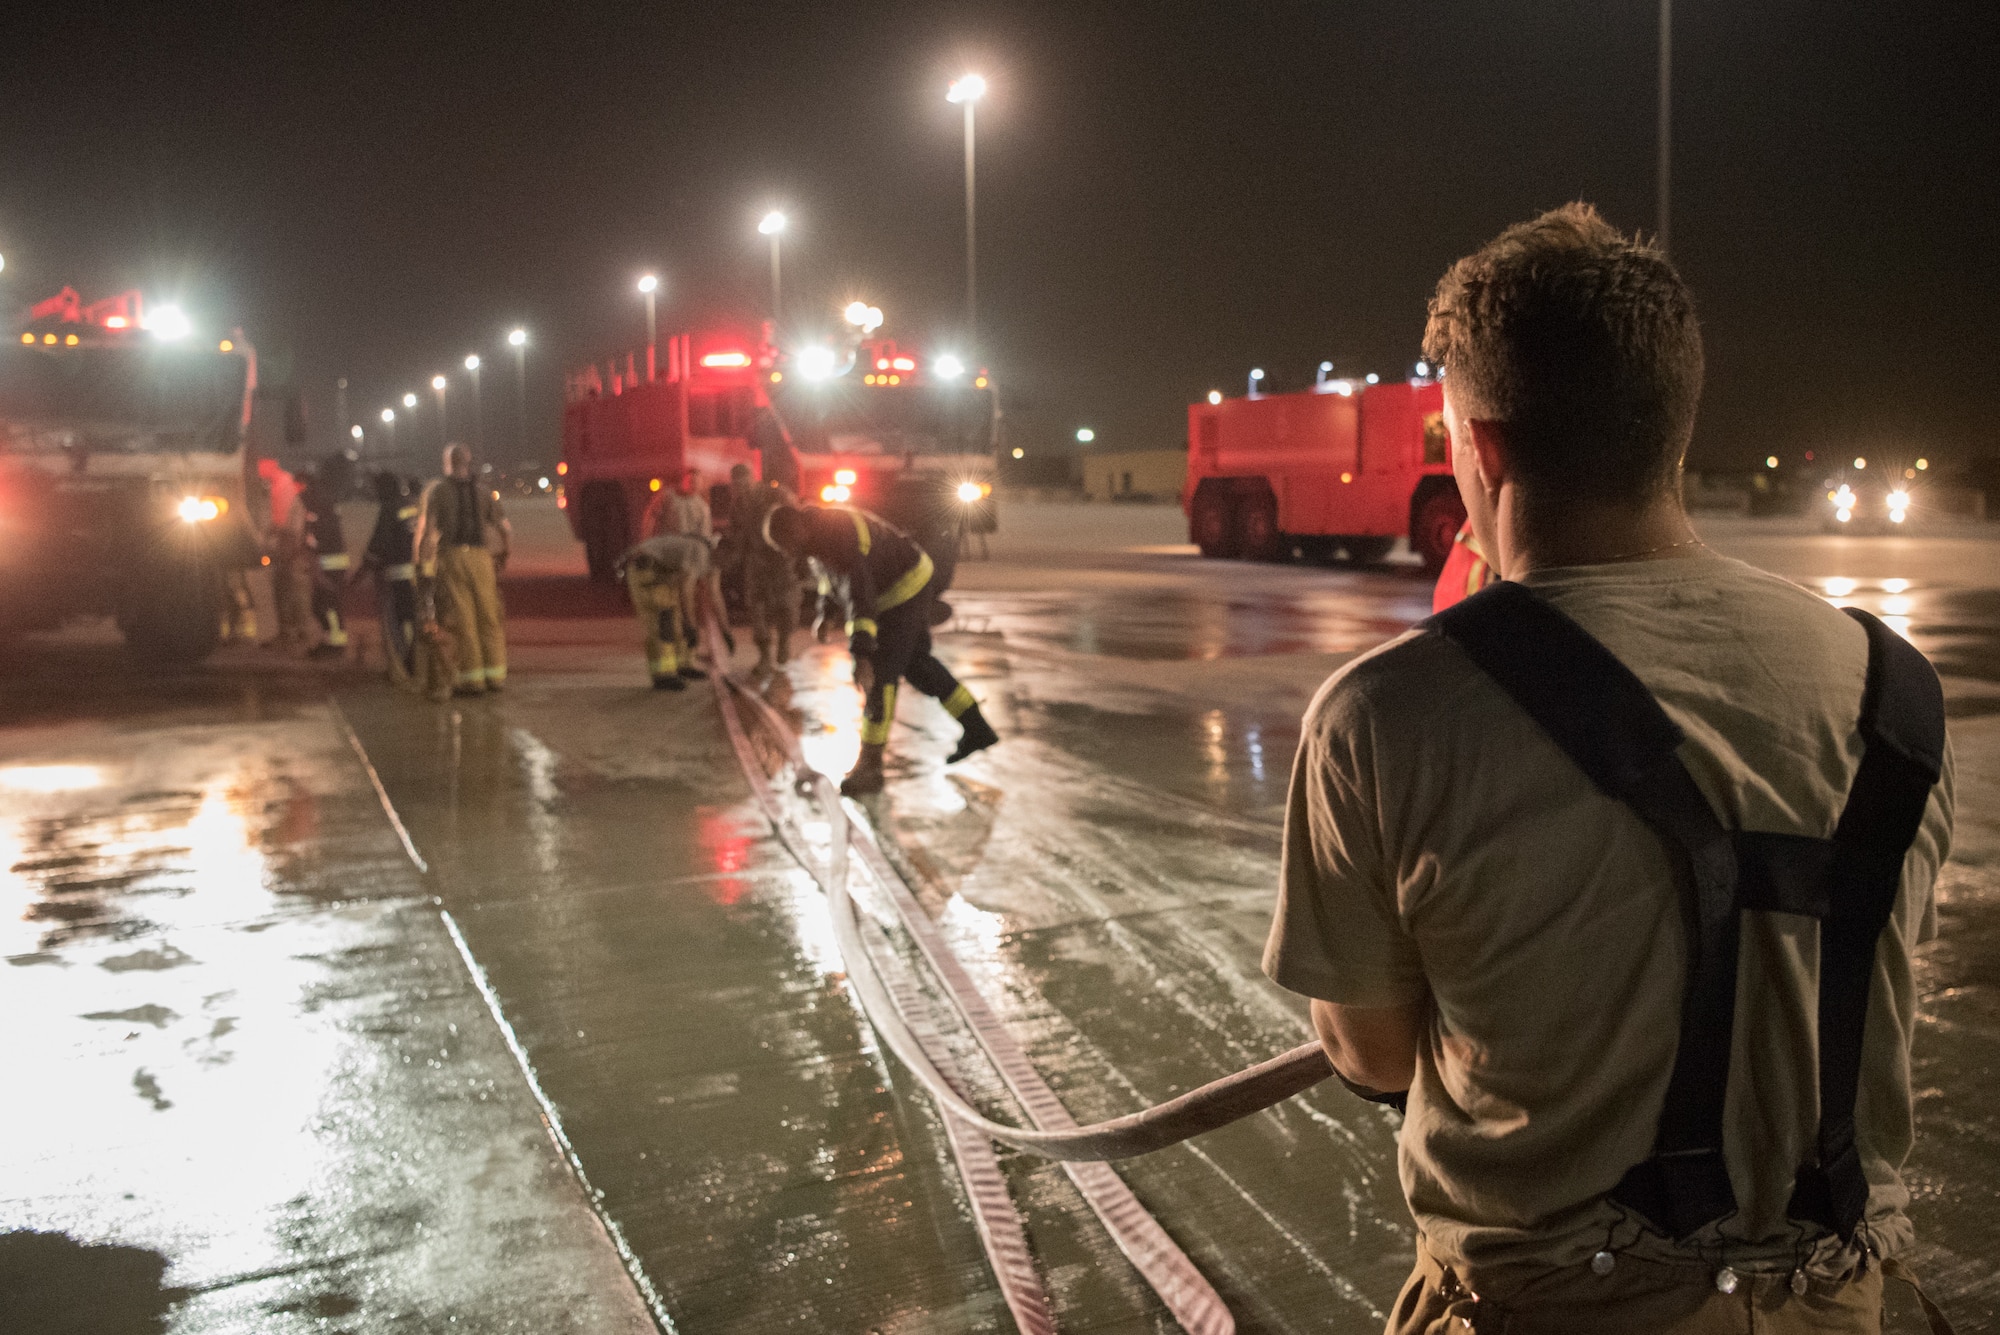 Firefighters from the 379th Expeditionary Civil Engineer Squadron and Qatar Emiri Air Force collaborate in a joint training exercise at Al Udeid Air Base, Qatar, Feb. 28, 2018. The exercise, a simulated response to a C-130 Hercules aircraft fire emergency, marks the first instance of the partner forces responding together in the same vehicles. (U.S. Air Force photo by Staff Sgt. Joshua Horton)